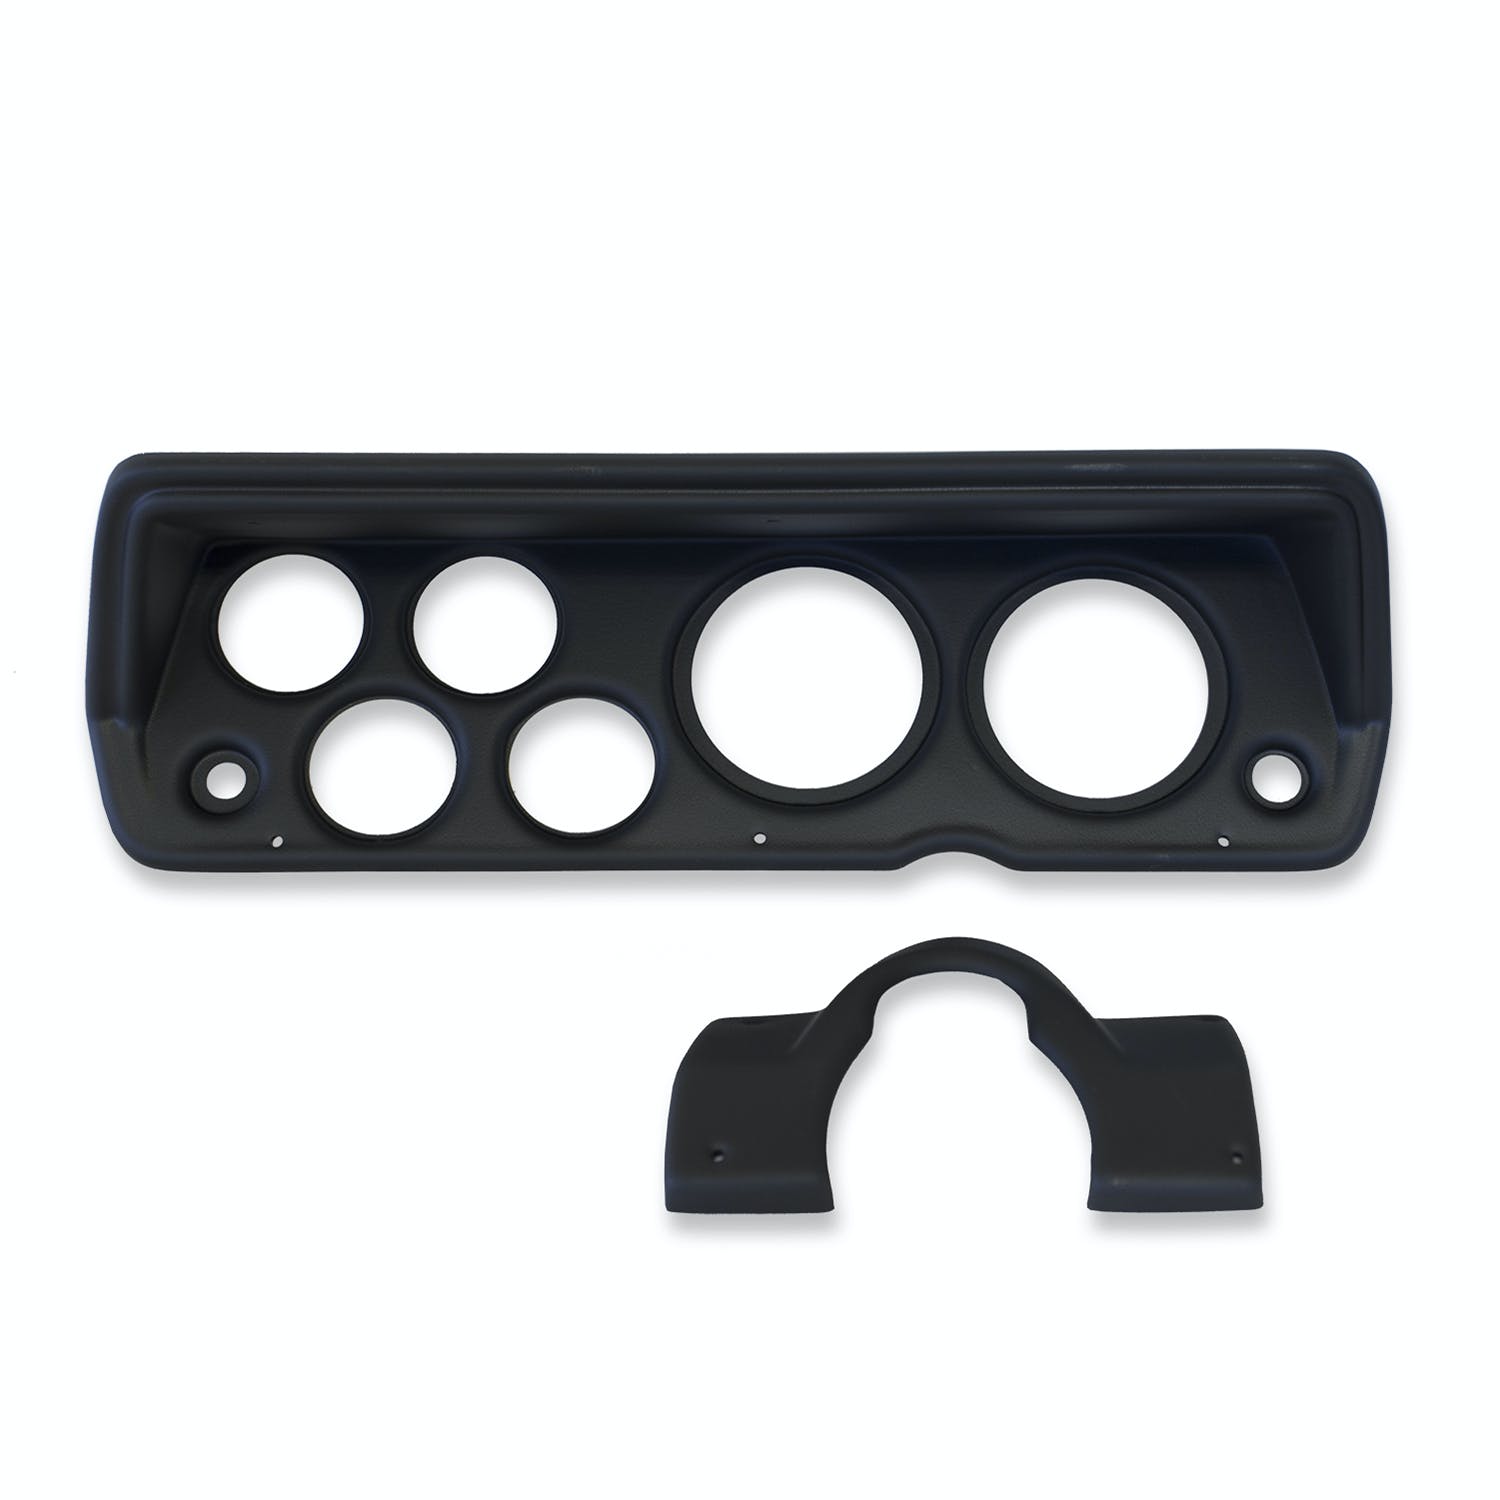 AutoMeter Products 2141 Direct Fit Replacement Gauge Panel, Black Finish